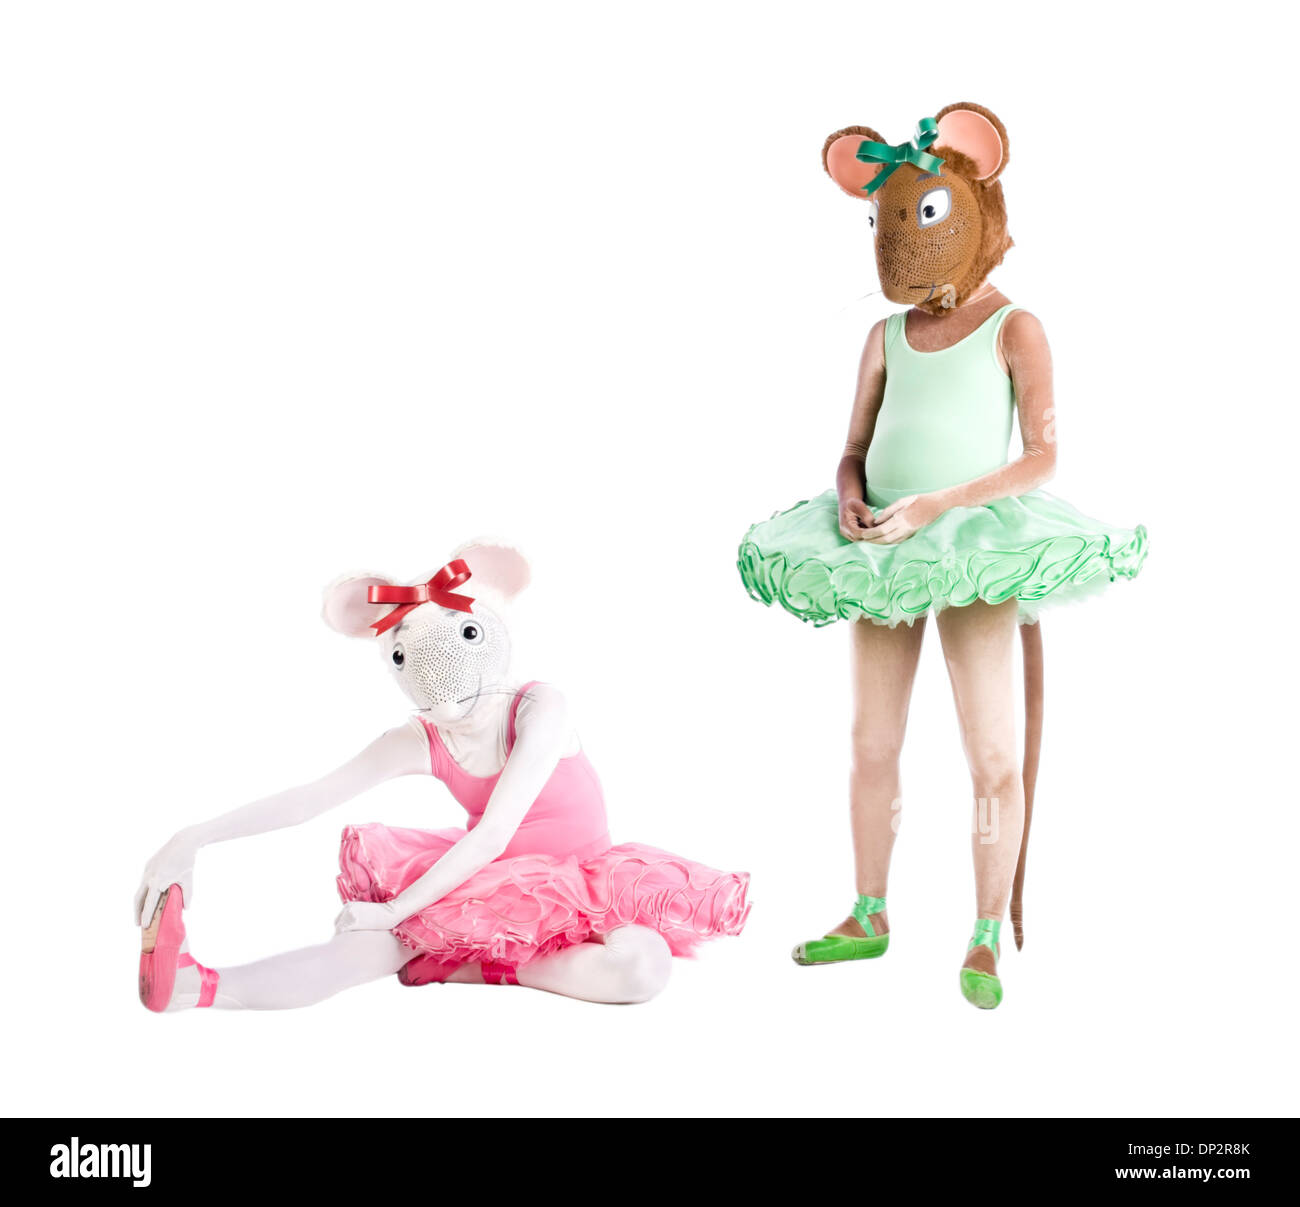 Angelina Ballerina and friend photographed in the studio Stock Photo - Alamy